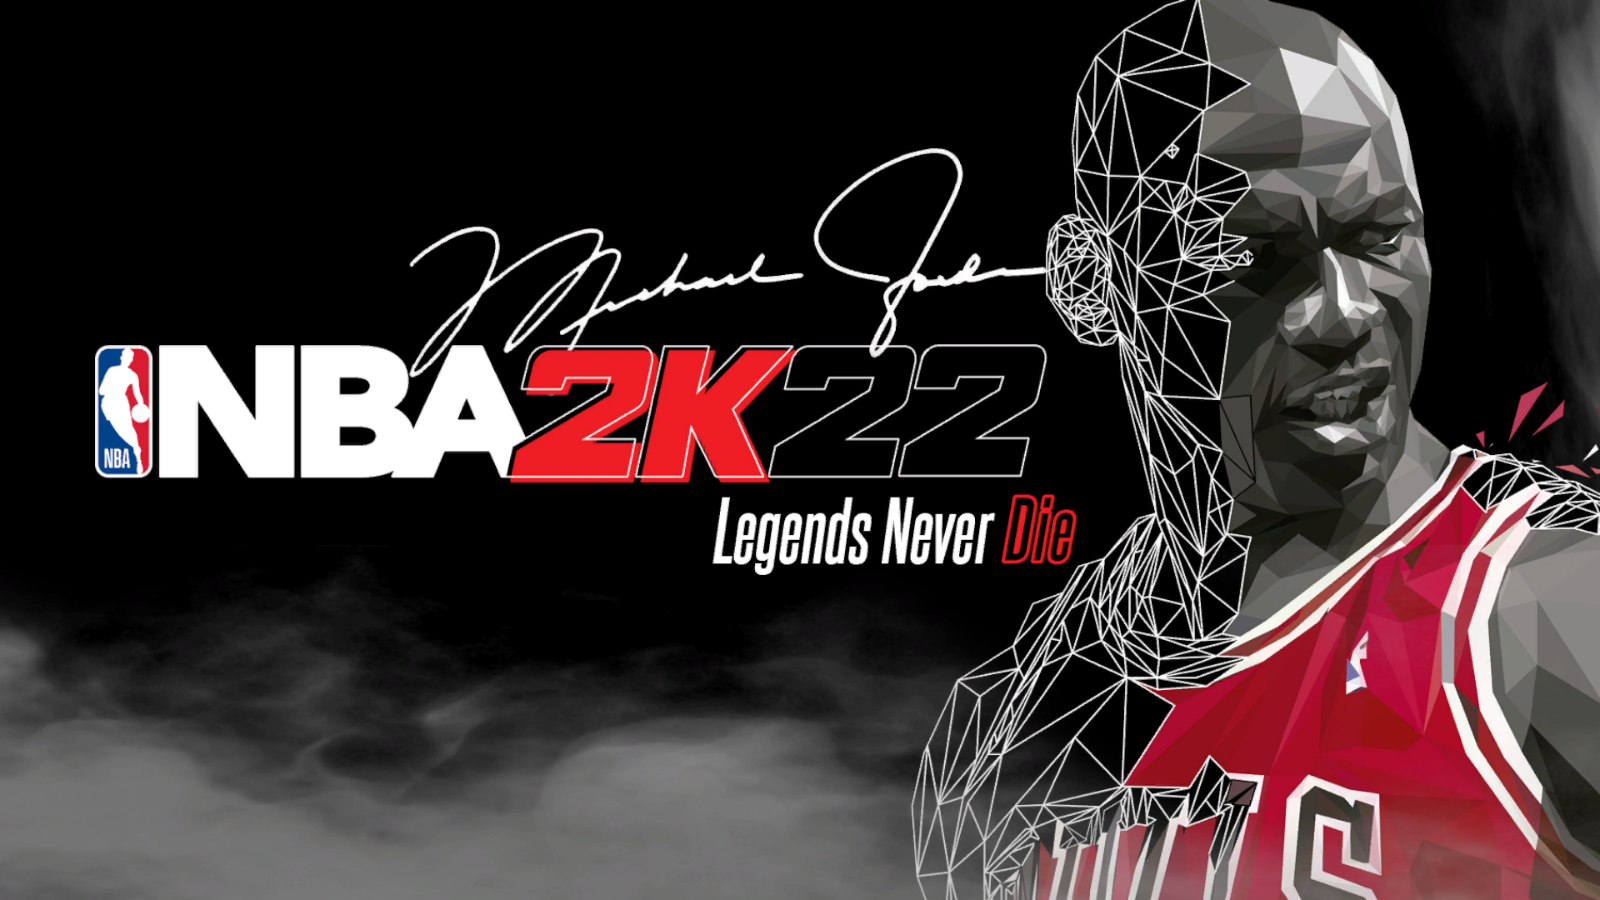 NBA 2k22 attempts truly to leave from the dull interactivity